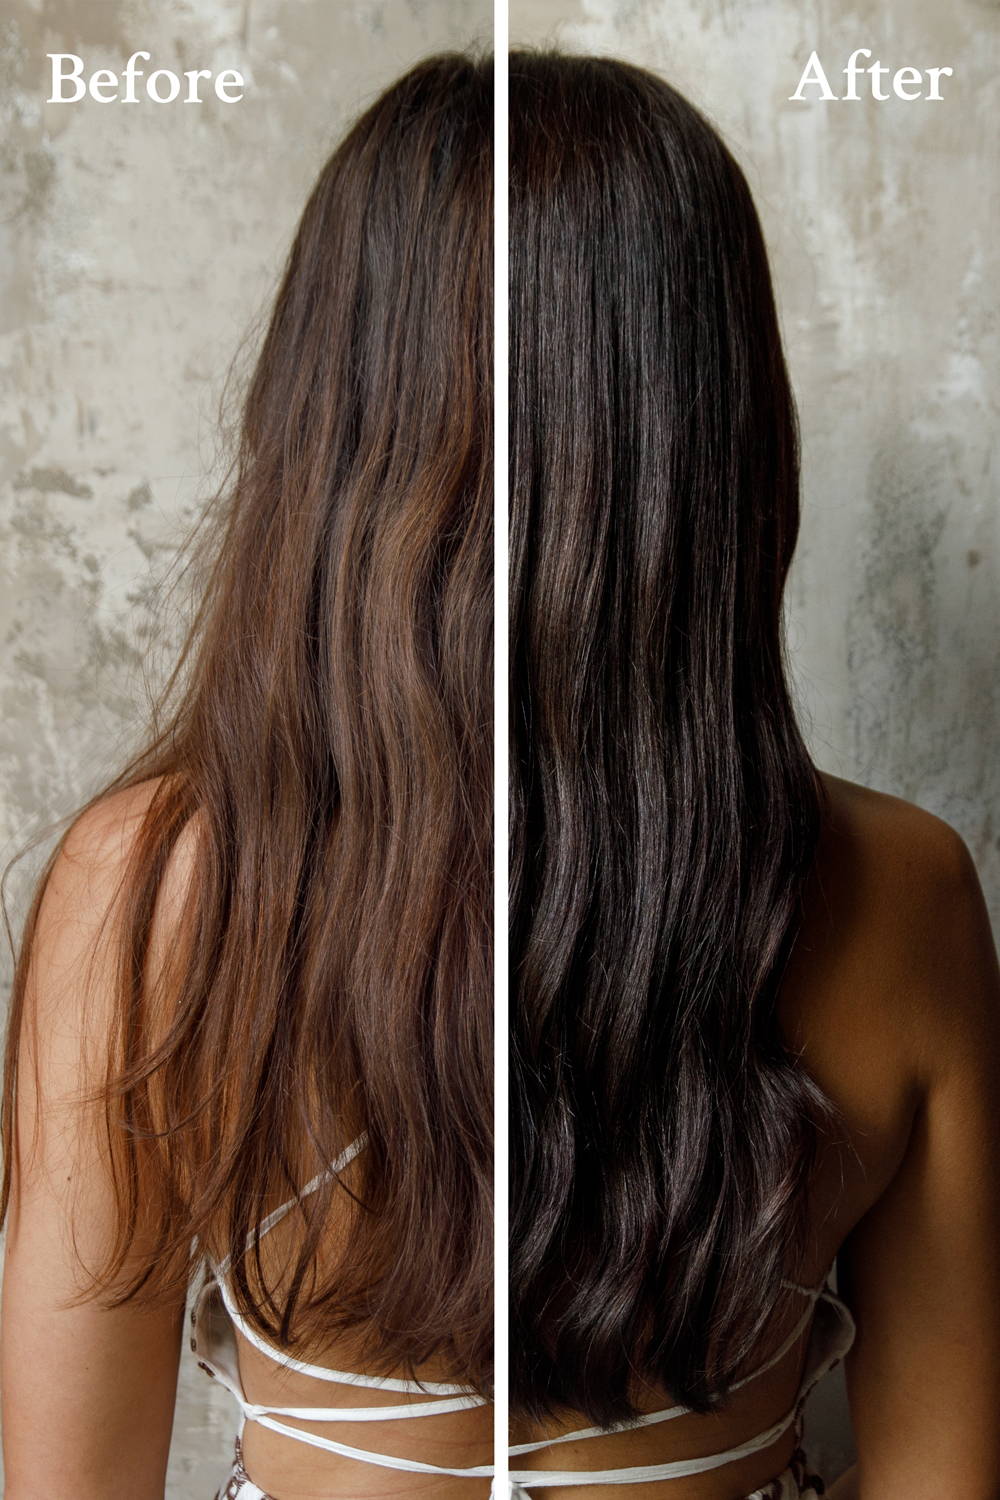 How to Repair Summer Hair Damage with Salon-Approved Treatments - Davines  International